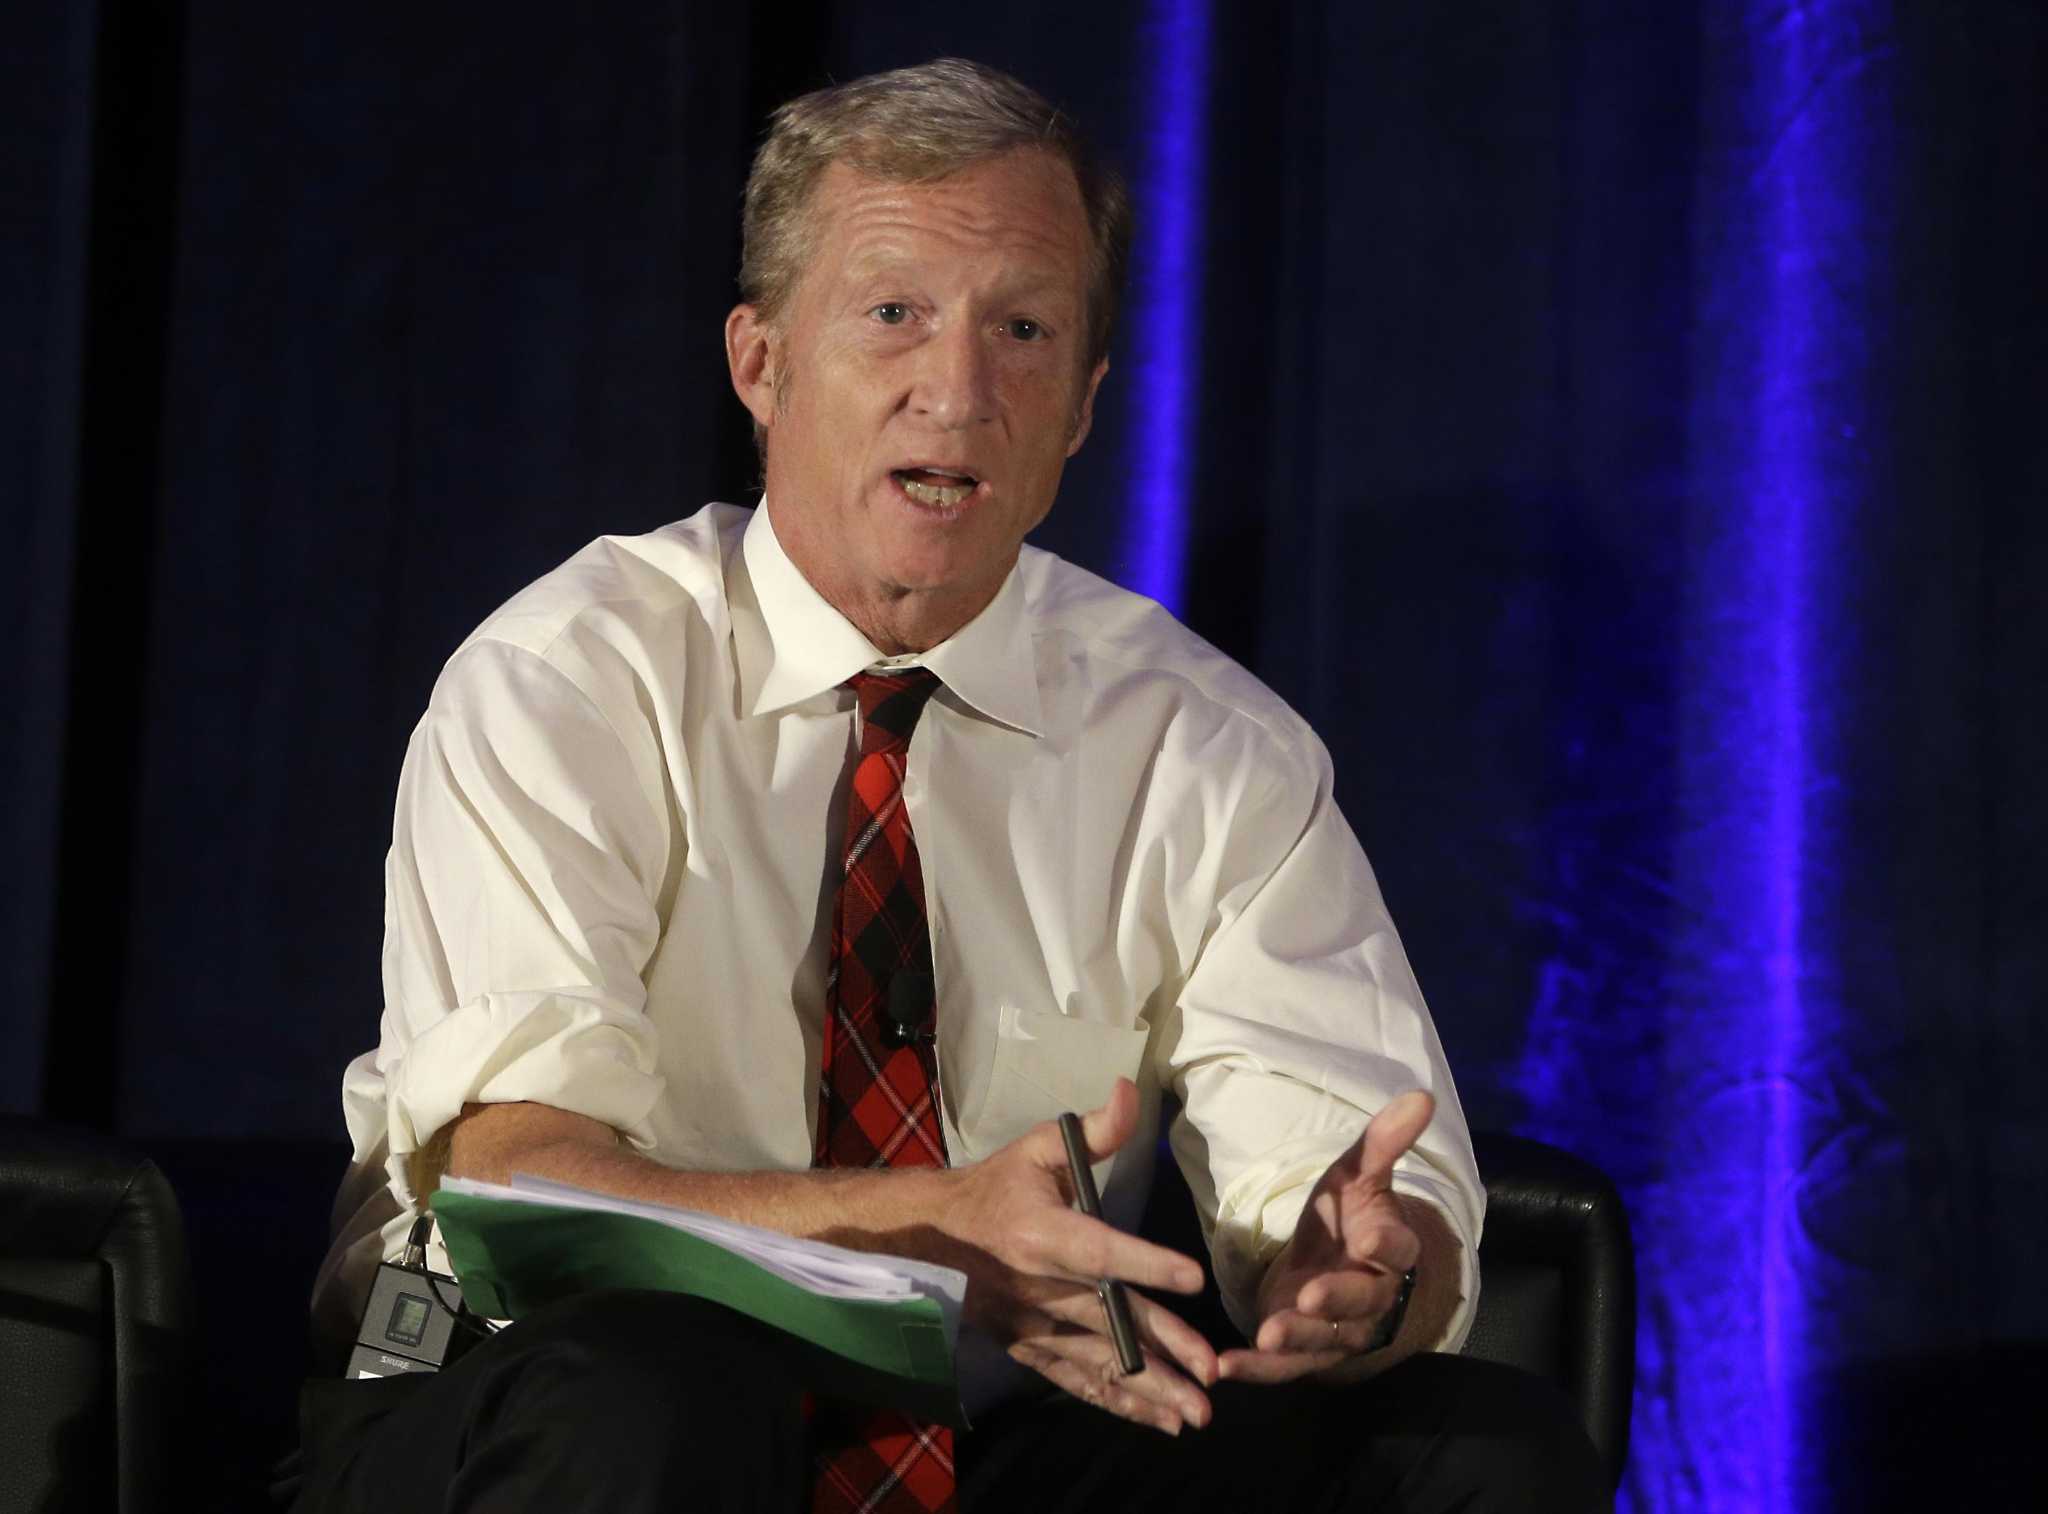 Tom Steyer-led group issues report on tackling income inequality - SFGate2048 x 1514